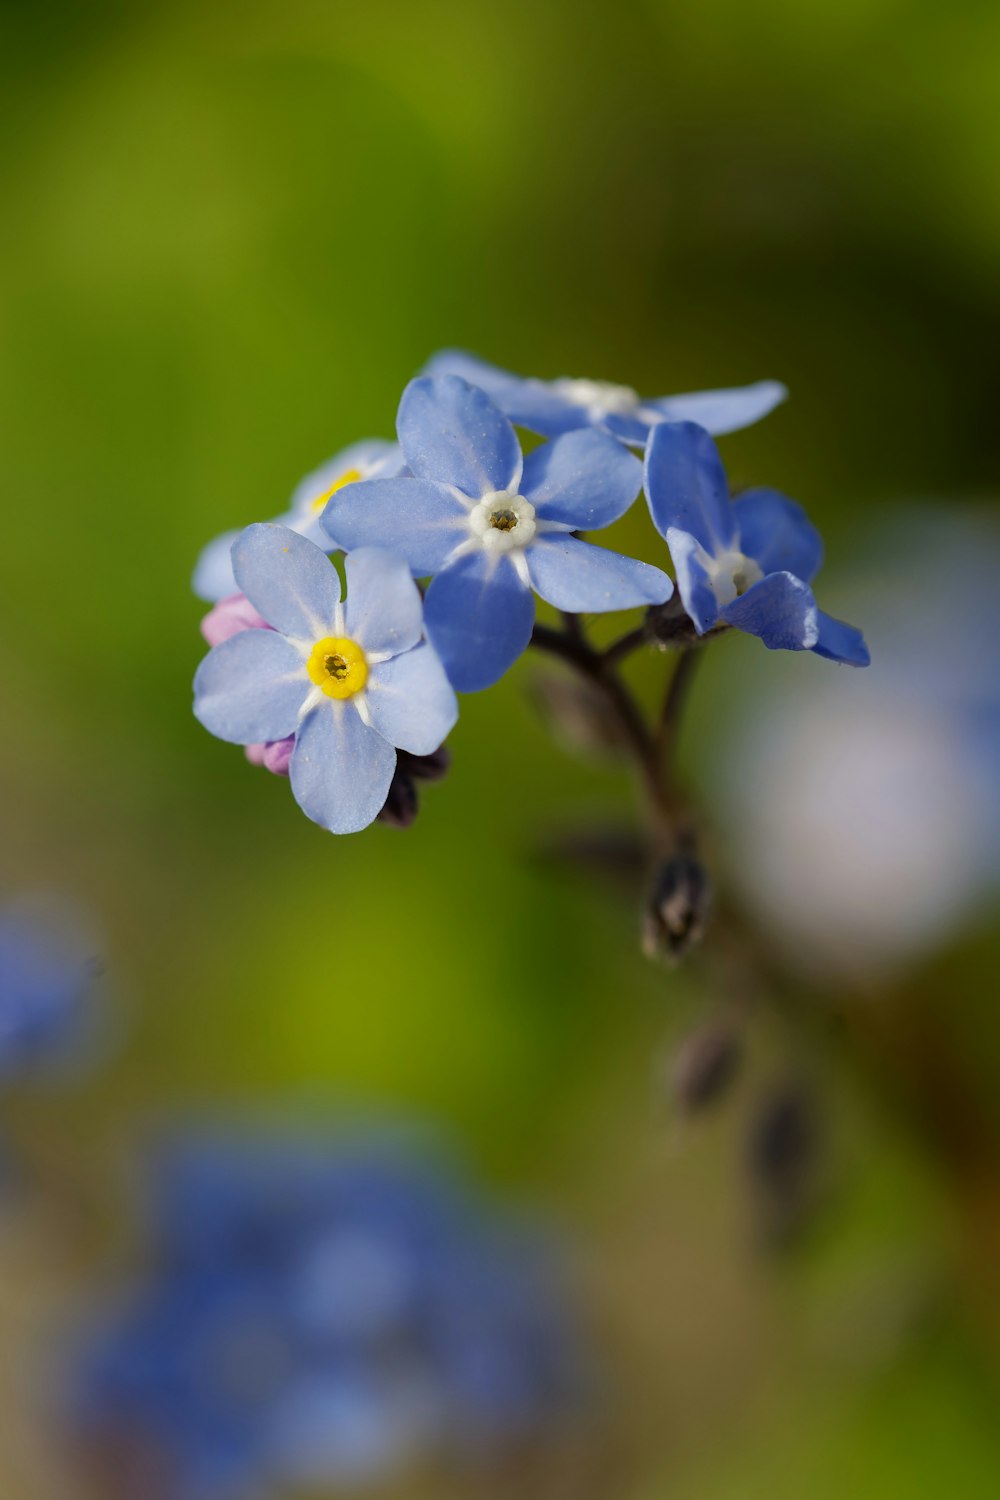 a small blue flower with yellow center surrounded by other blue flowers